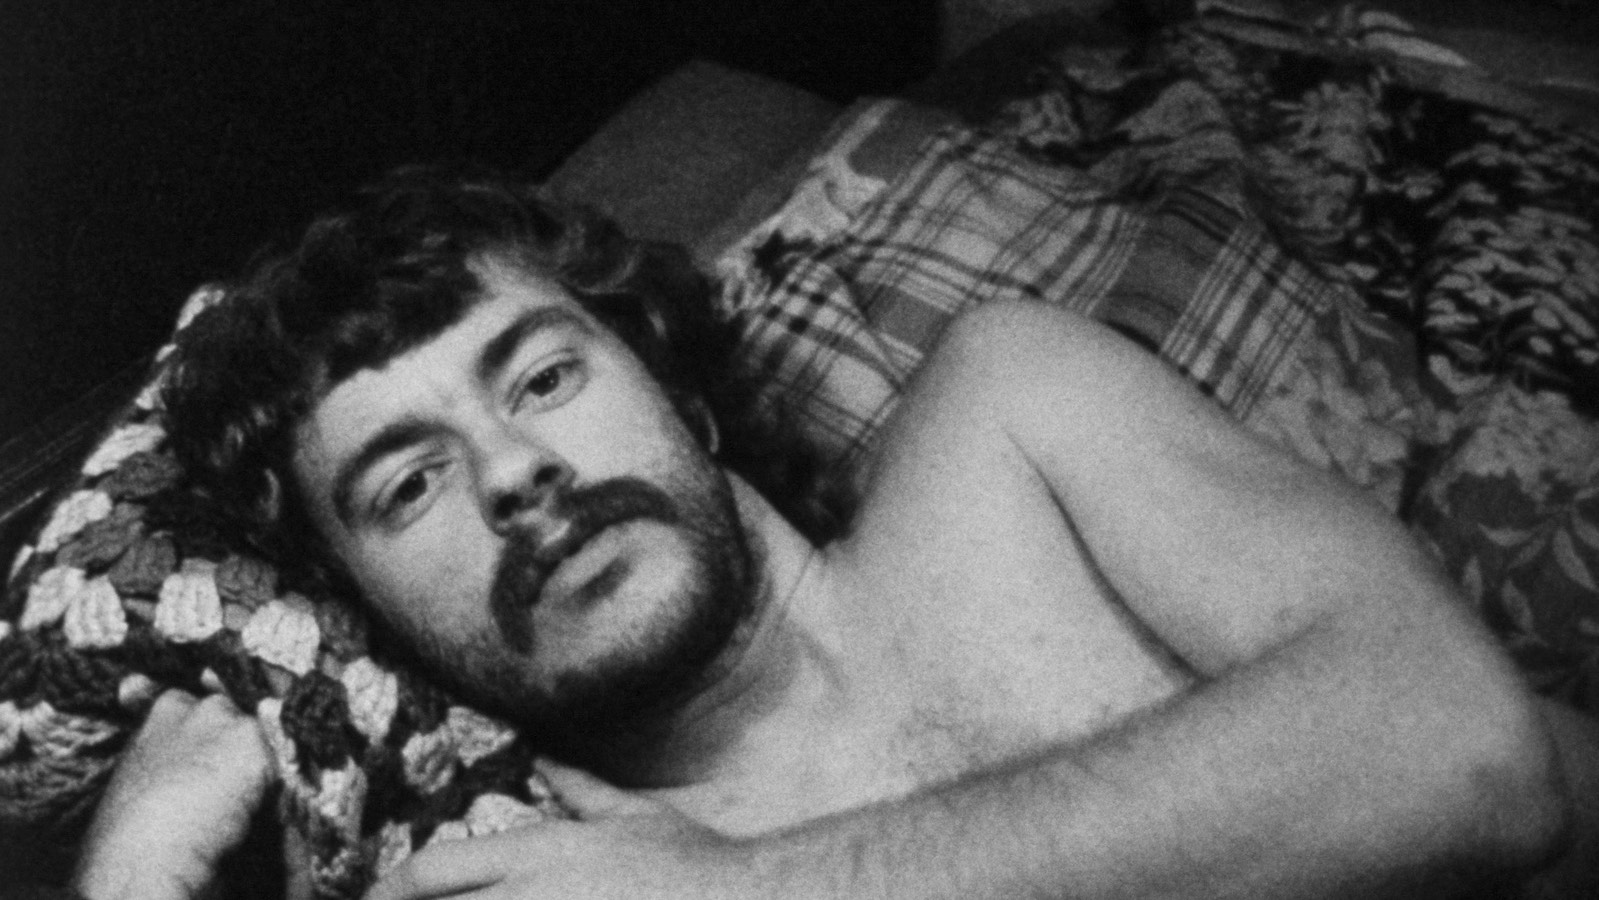 A bearded, shirtless man reclines in bed and looks at camera.